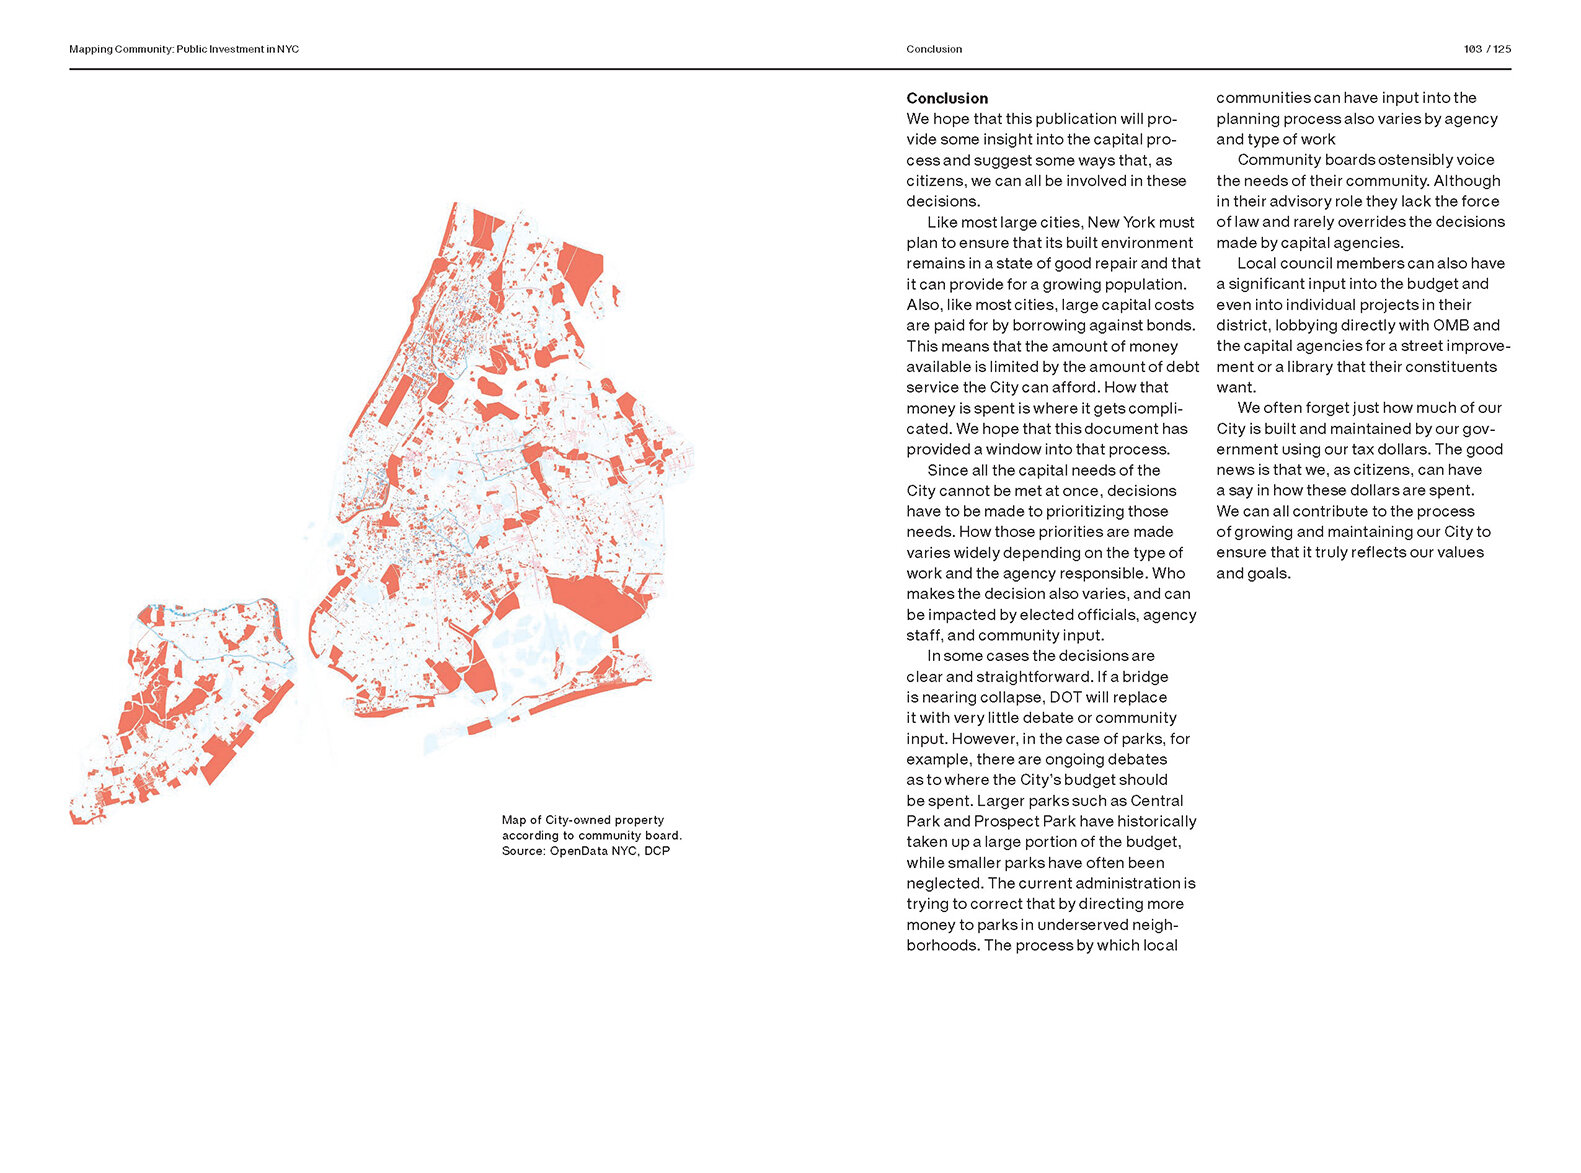 MAPPING COMMUNITY EXHIBT CATALOG_Page_52.jpg